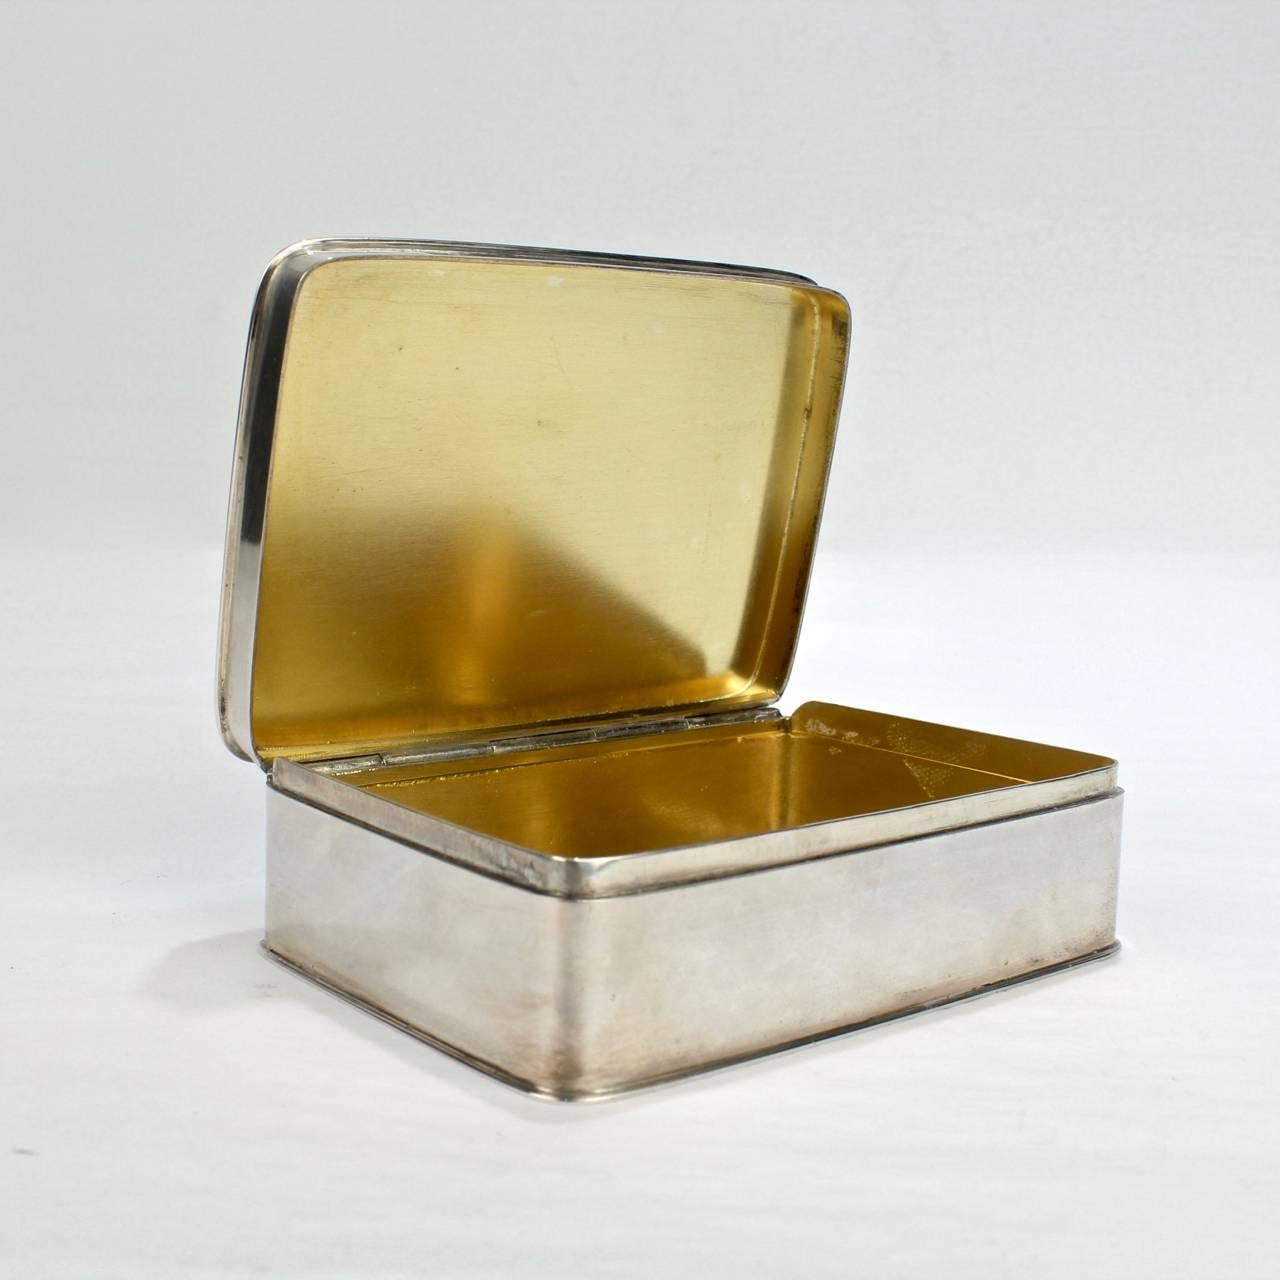 A fine Art Deco small Art Deco dresser box with sleek, simple lines and a gilt interior.

By Körner and Proll Silvermiths, who were active in Berlin in the late 19th and early 20th centuries.

Fully hallmarked to the base.

Measures: Width ca.